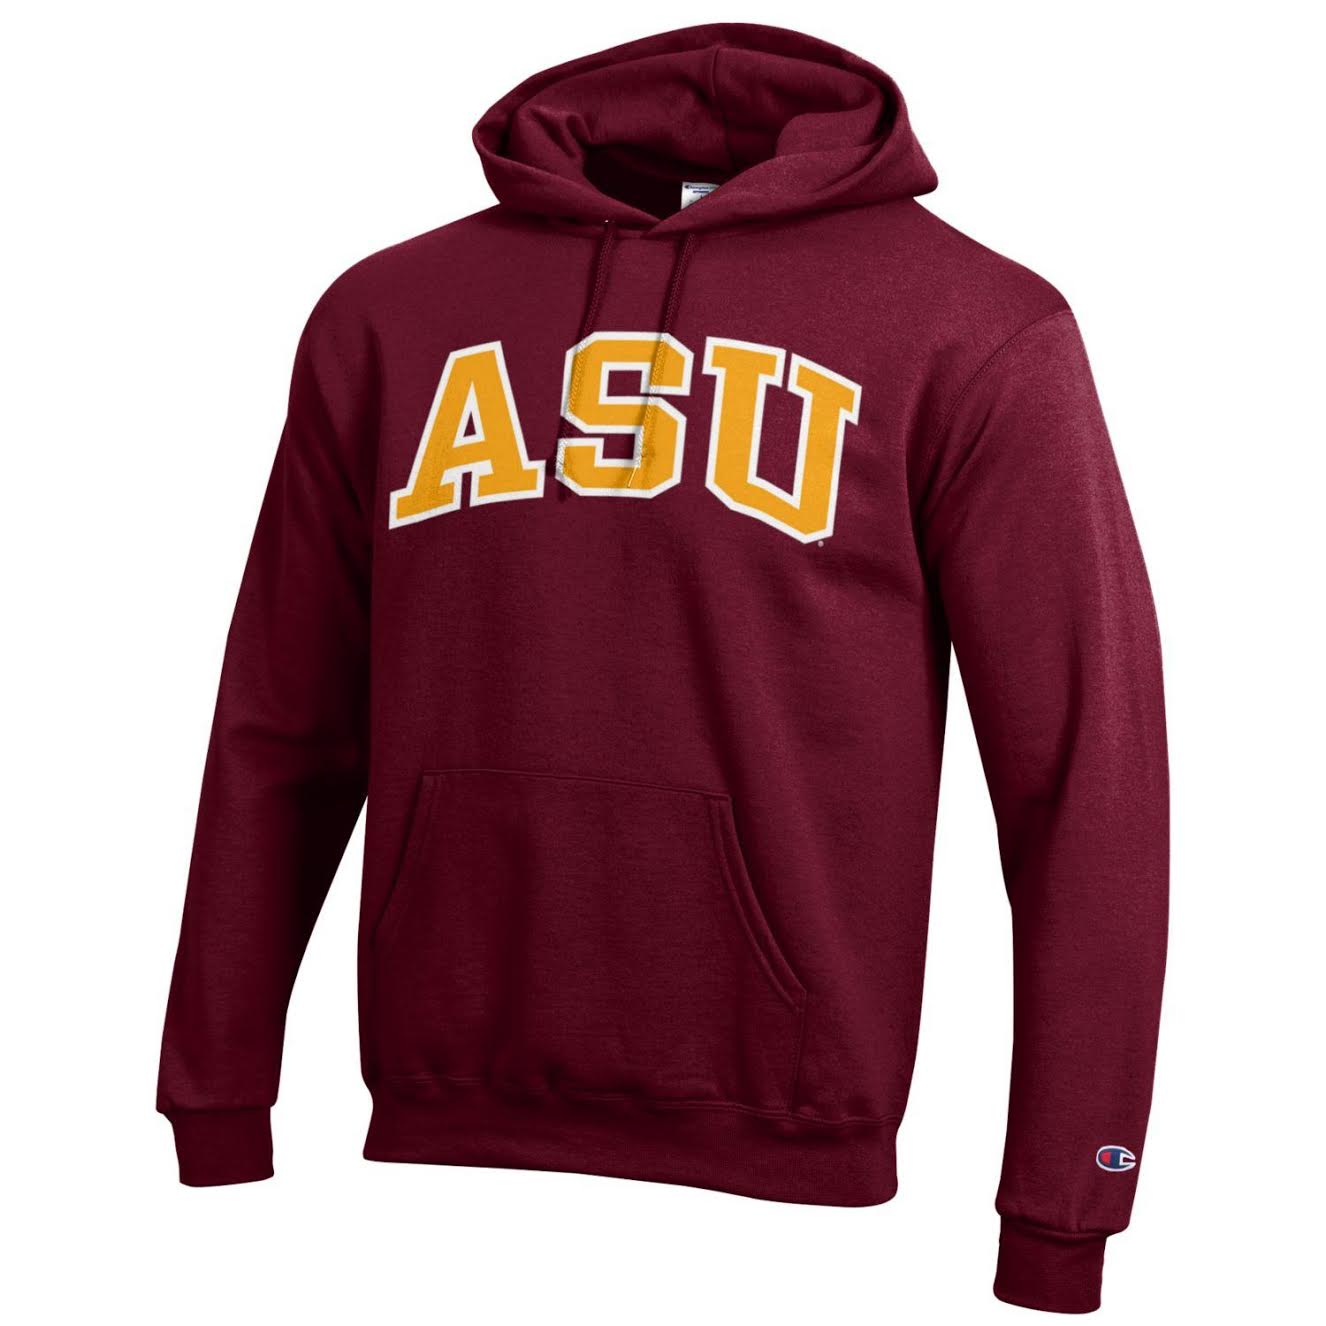 ASU maroon champion hoodie with ASU stitched across chest in gold.